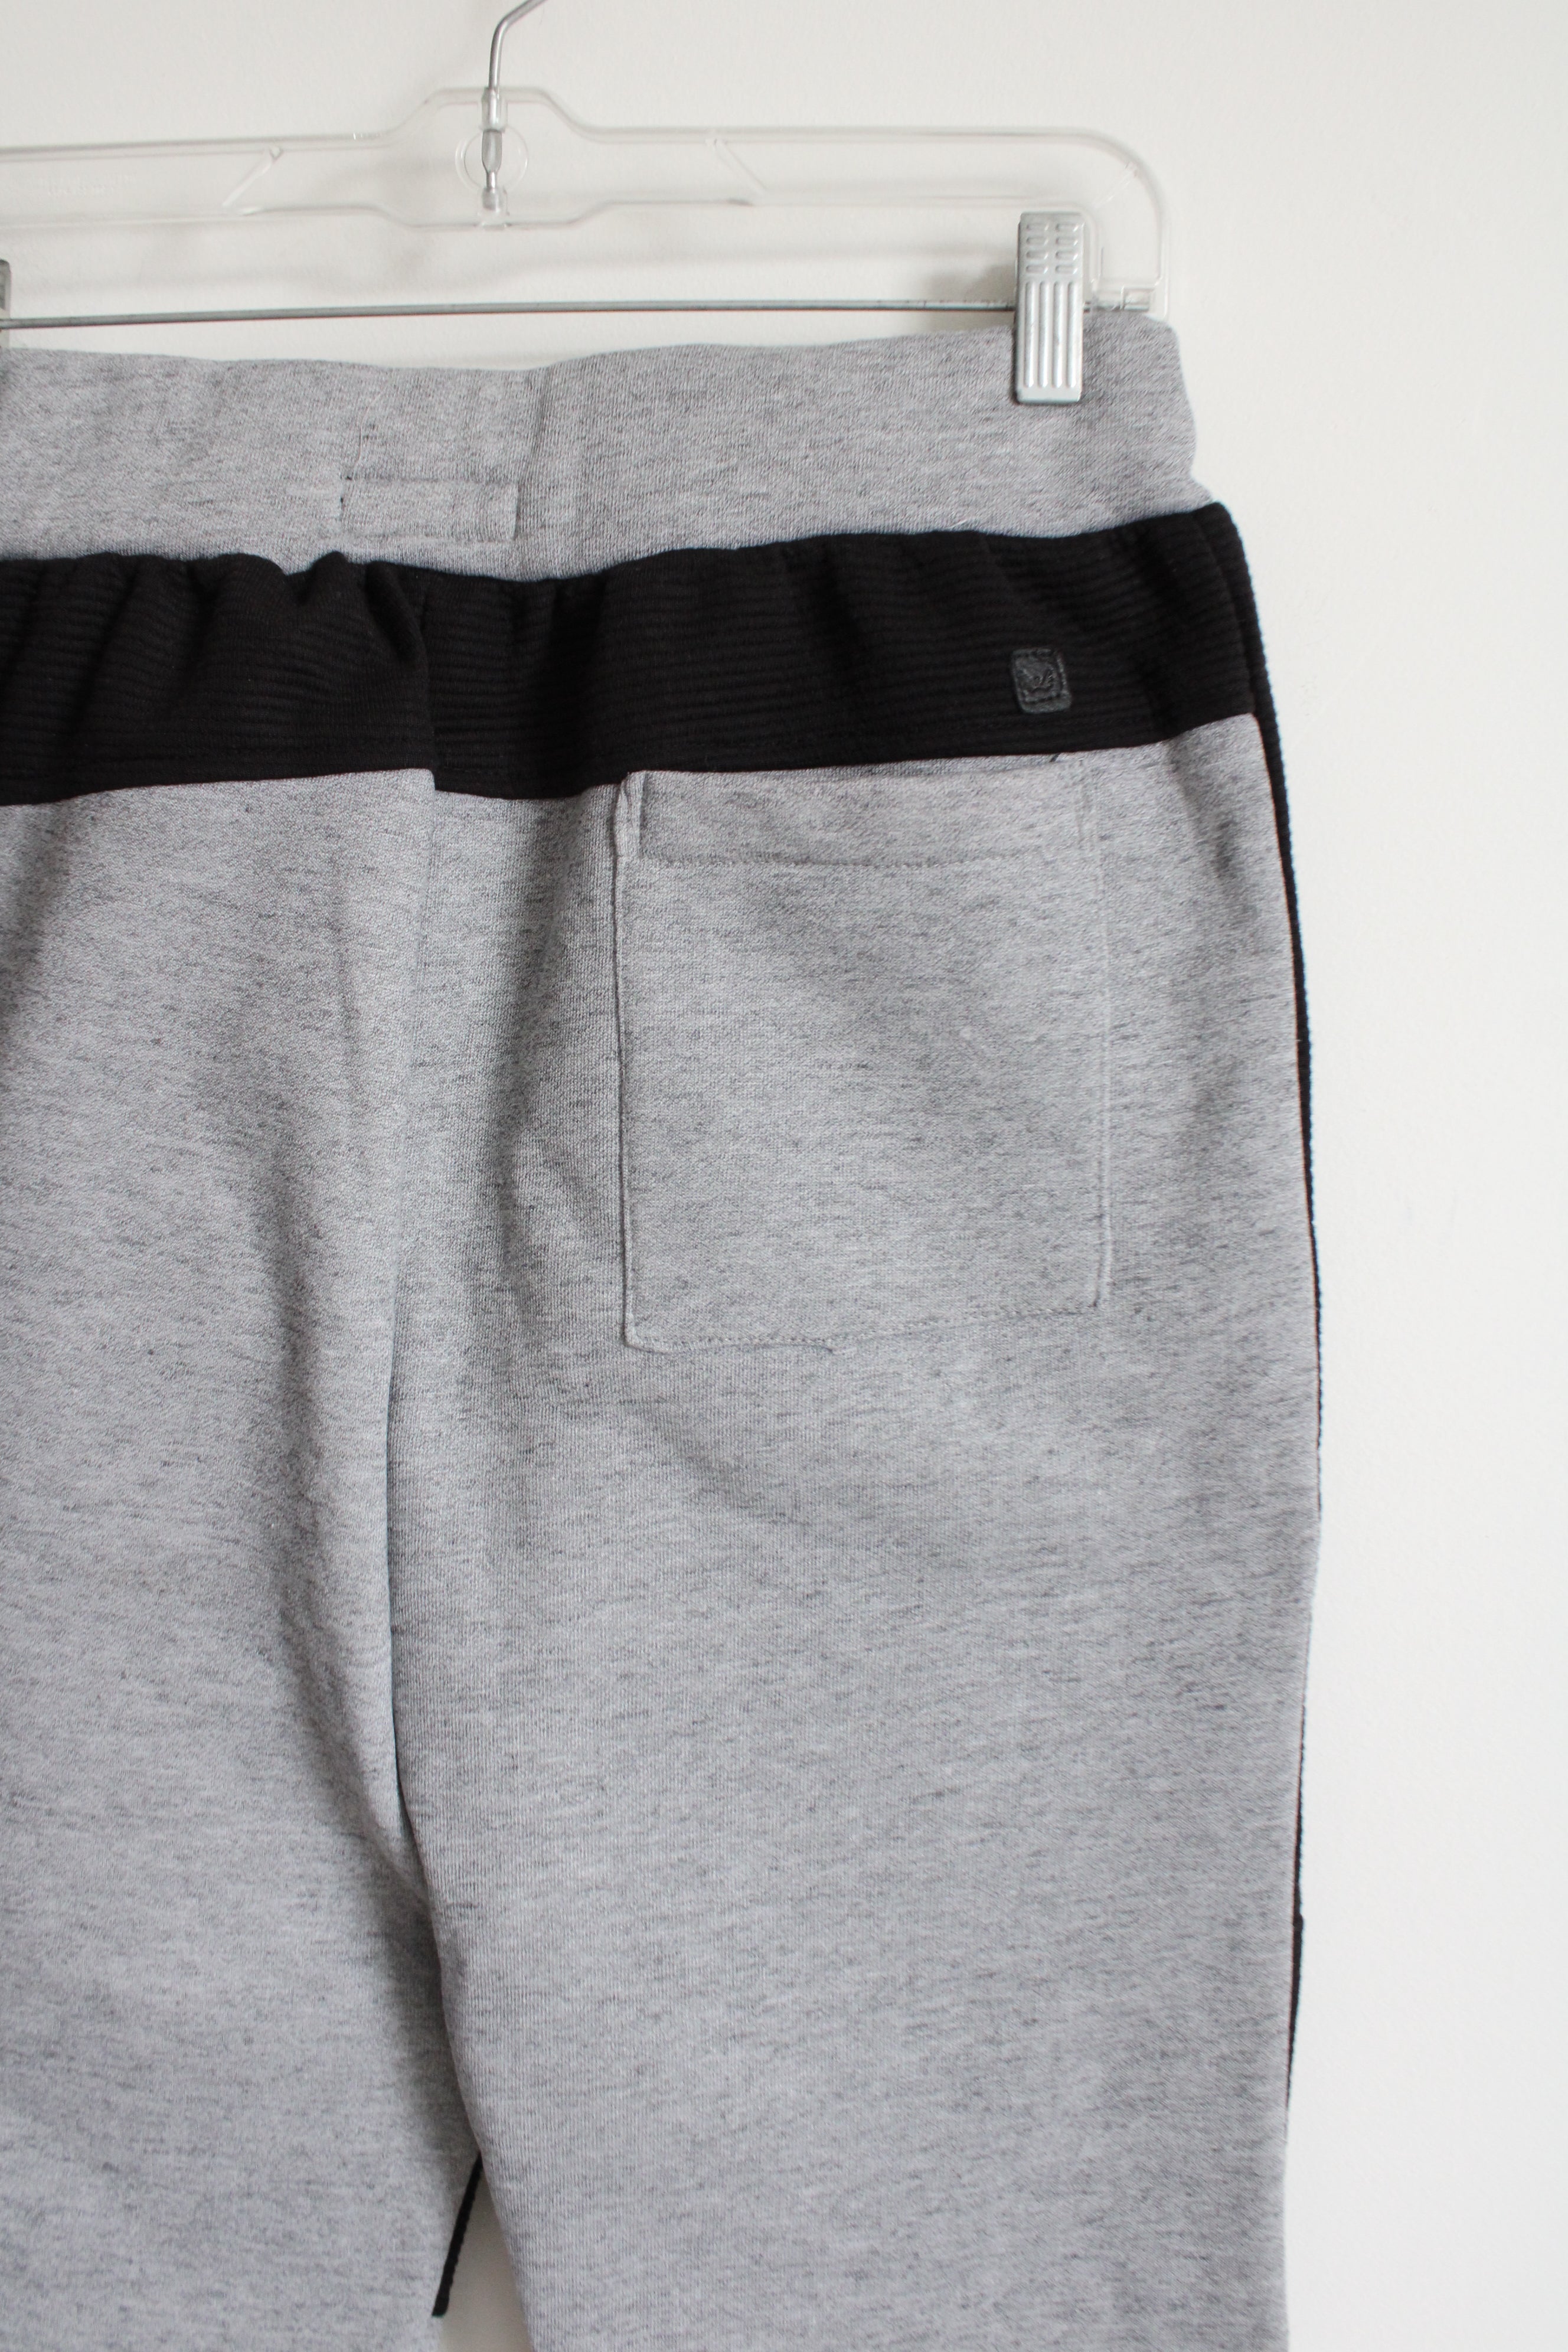 Steve's Jeans Gray Jogger Pant | Youth XL (16)